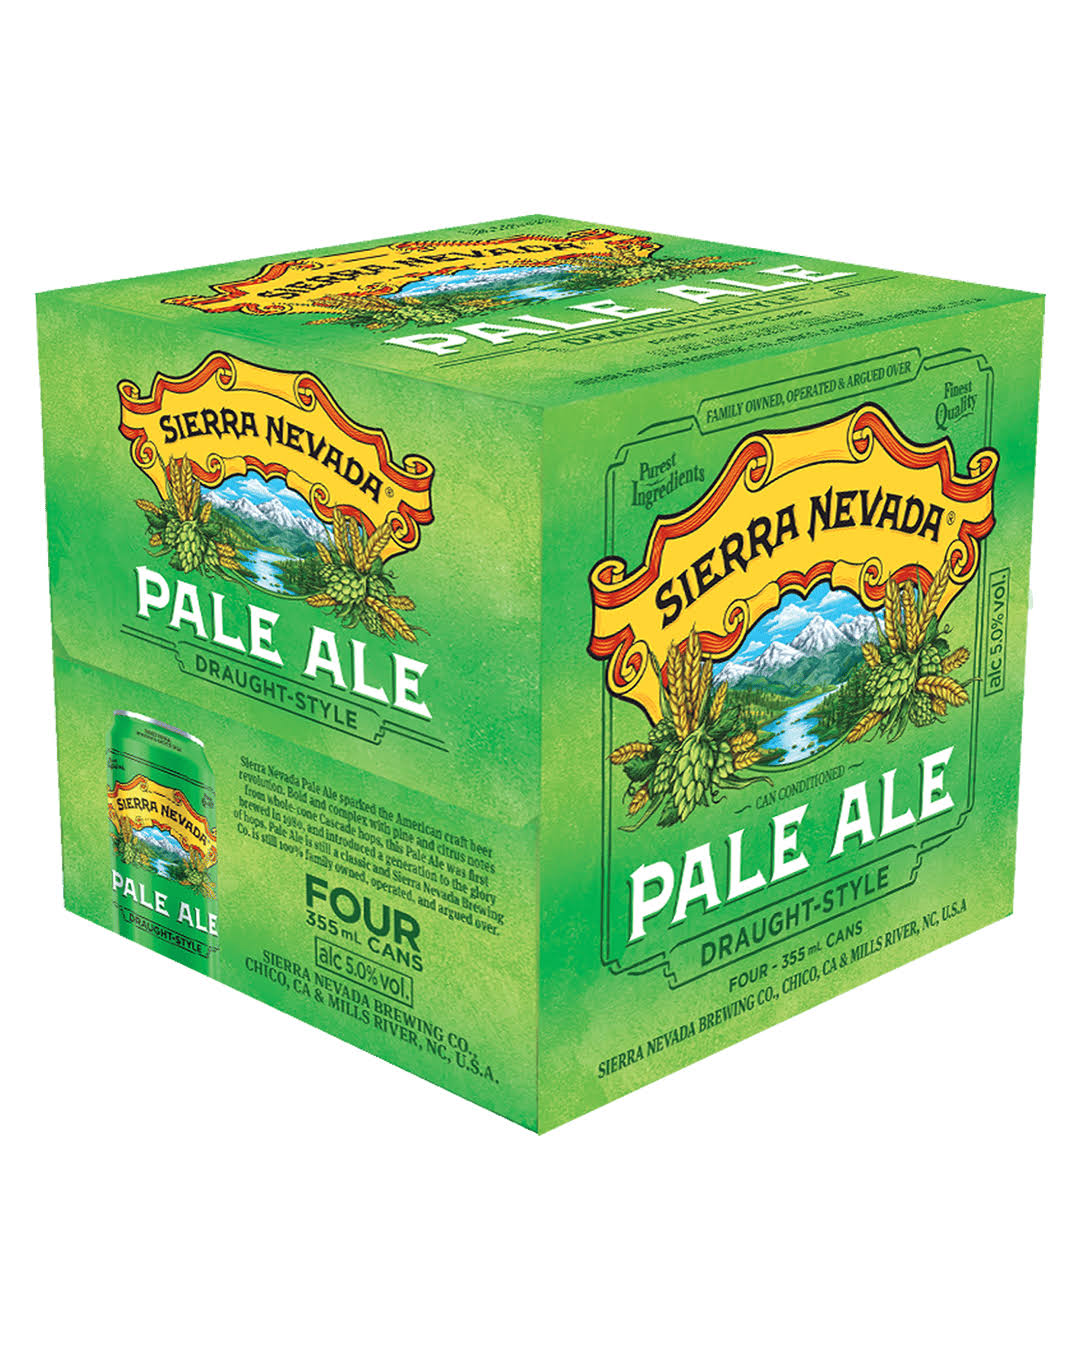 Sierra Nevada Draught Pale Can 355ml X4 Pack